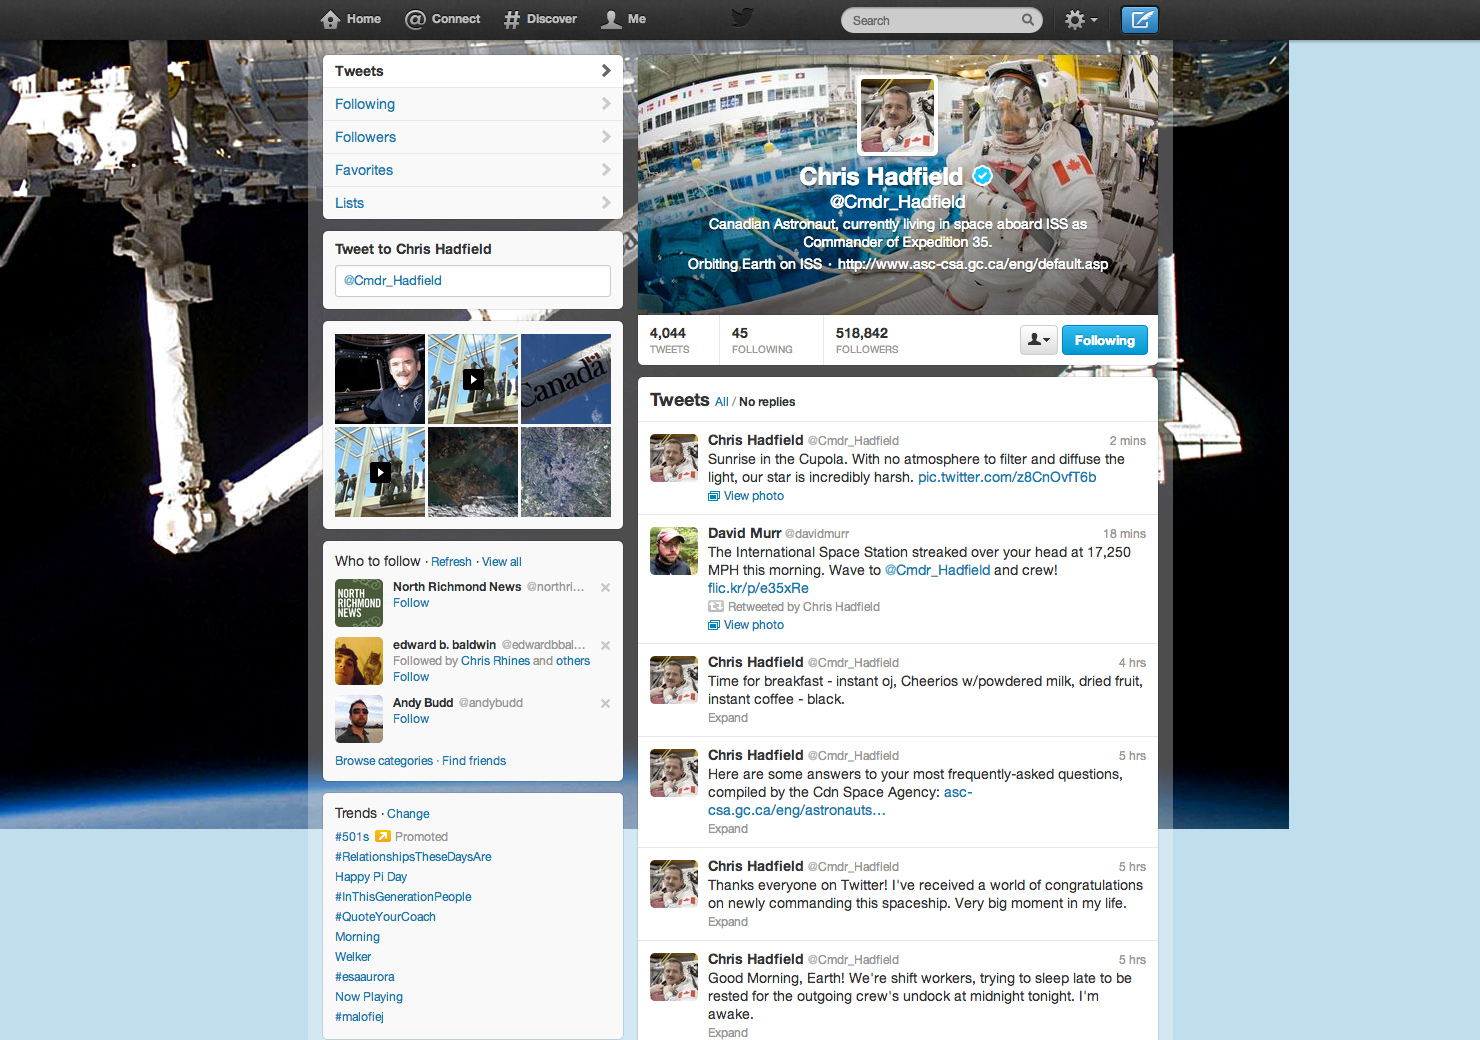 Chris Hadfield retweeted me from space!